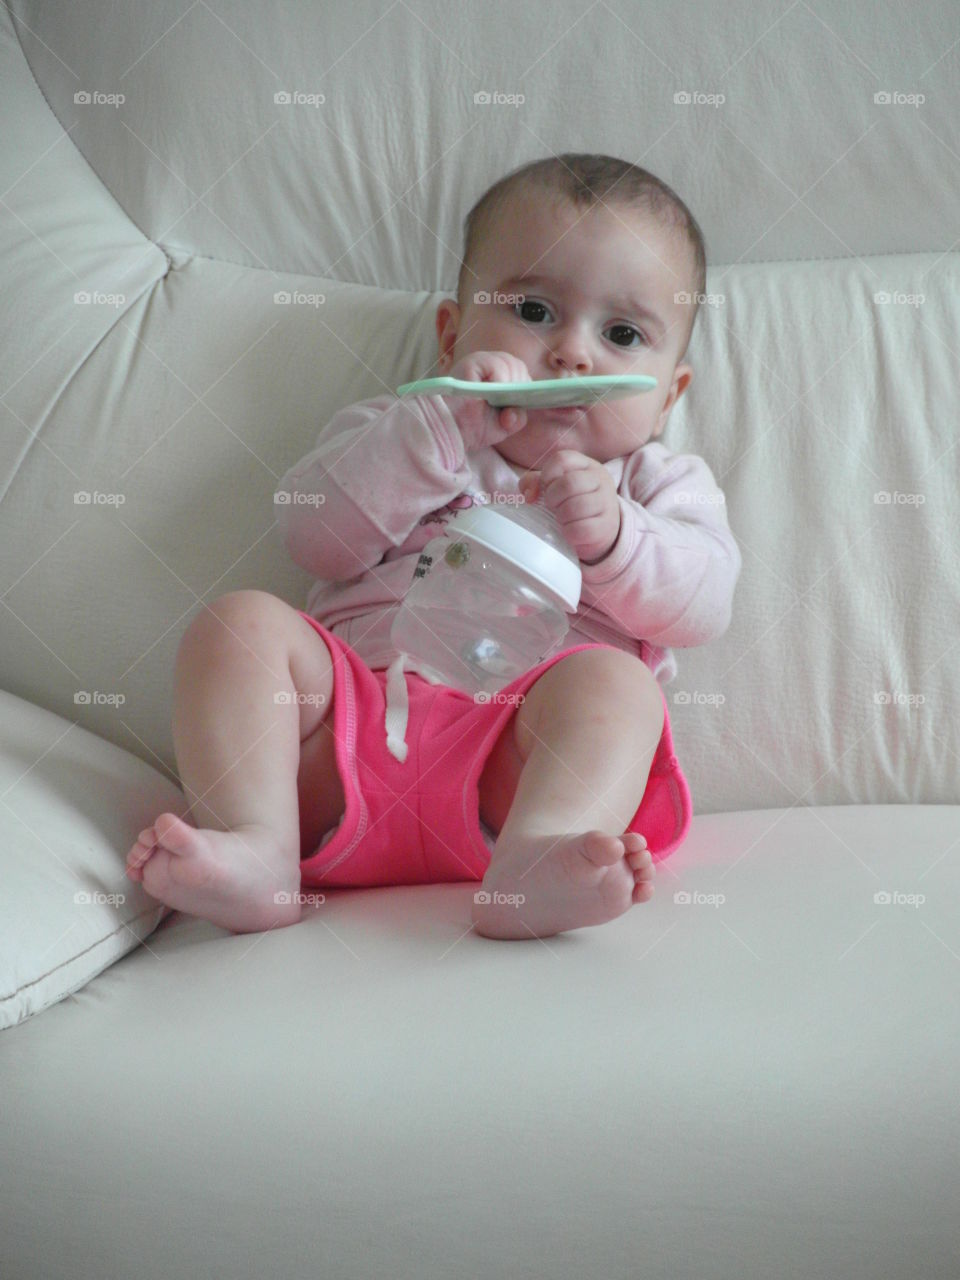 Sahar-Marie and baby bottle. cute baby girl on couch with baby bottle